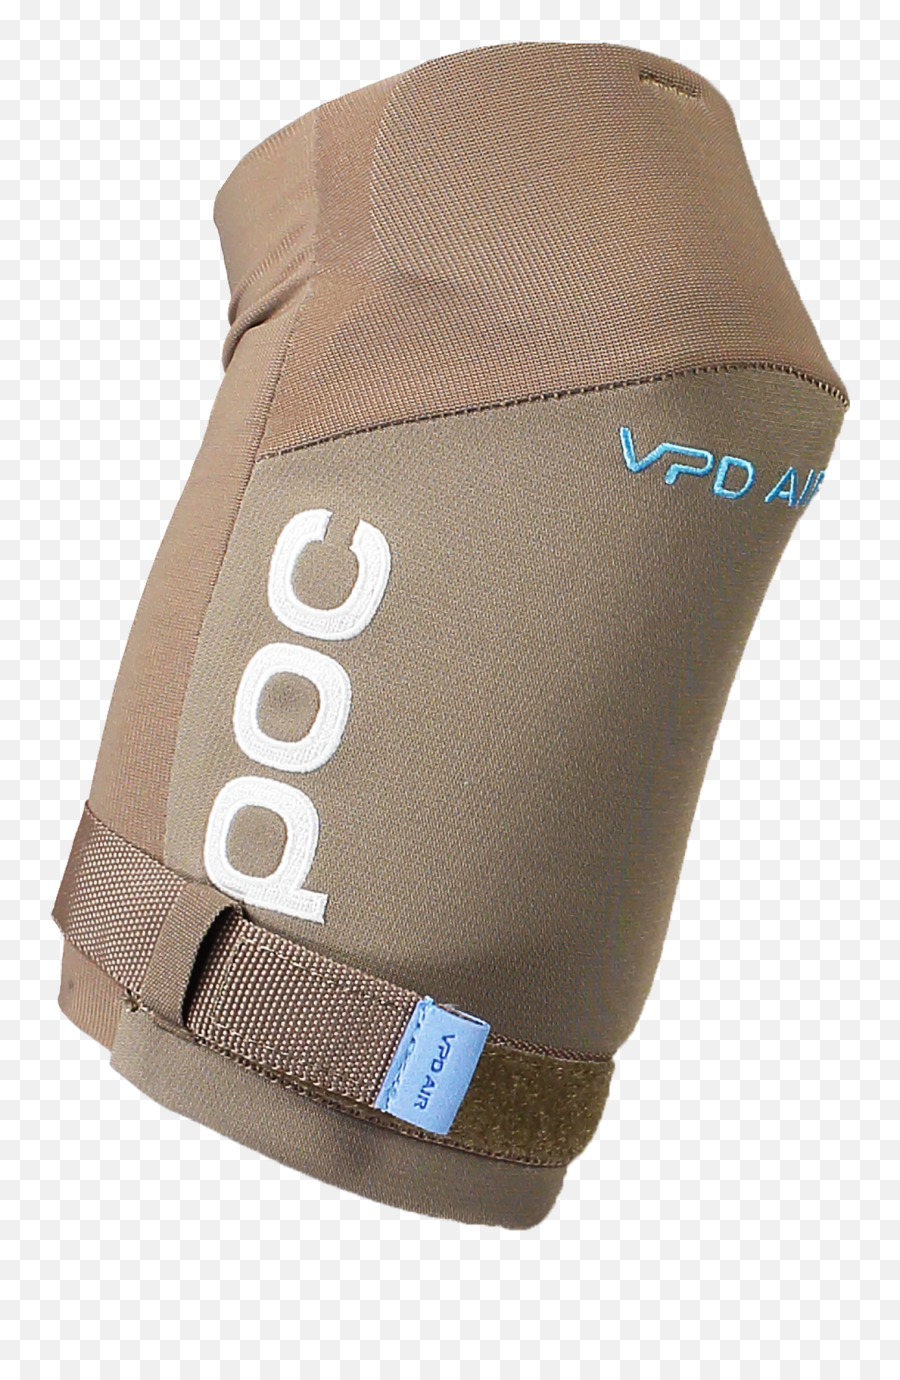 Poc - Poc Joint Vpd Air Elbow Png,Icon Field Armor Knee Guards